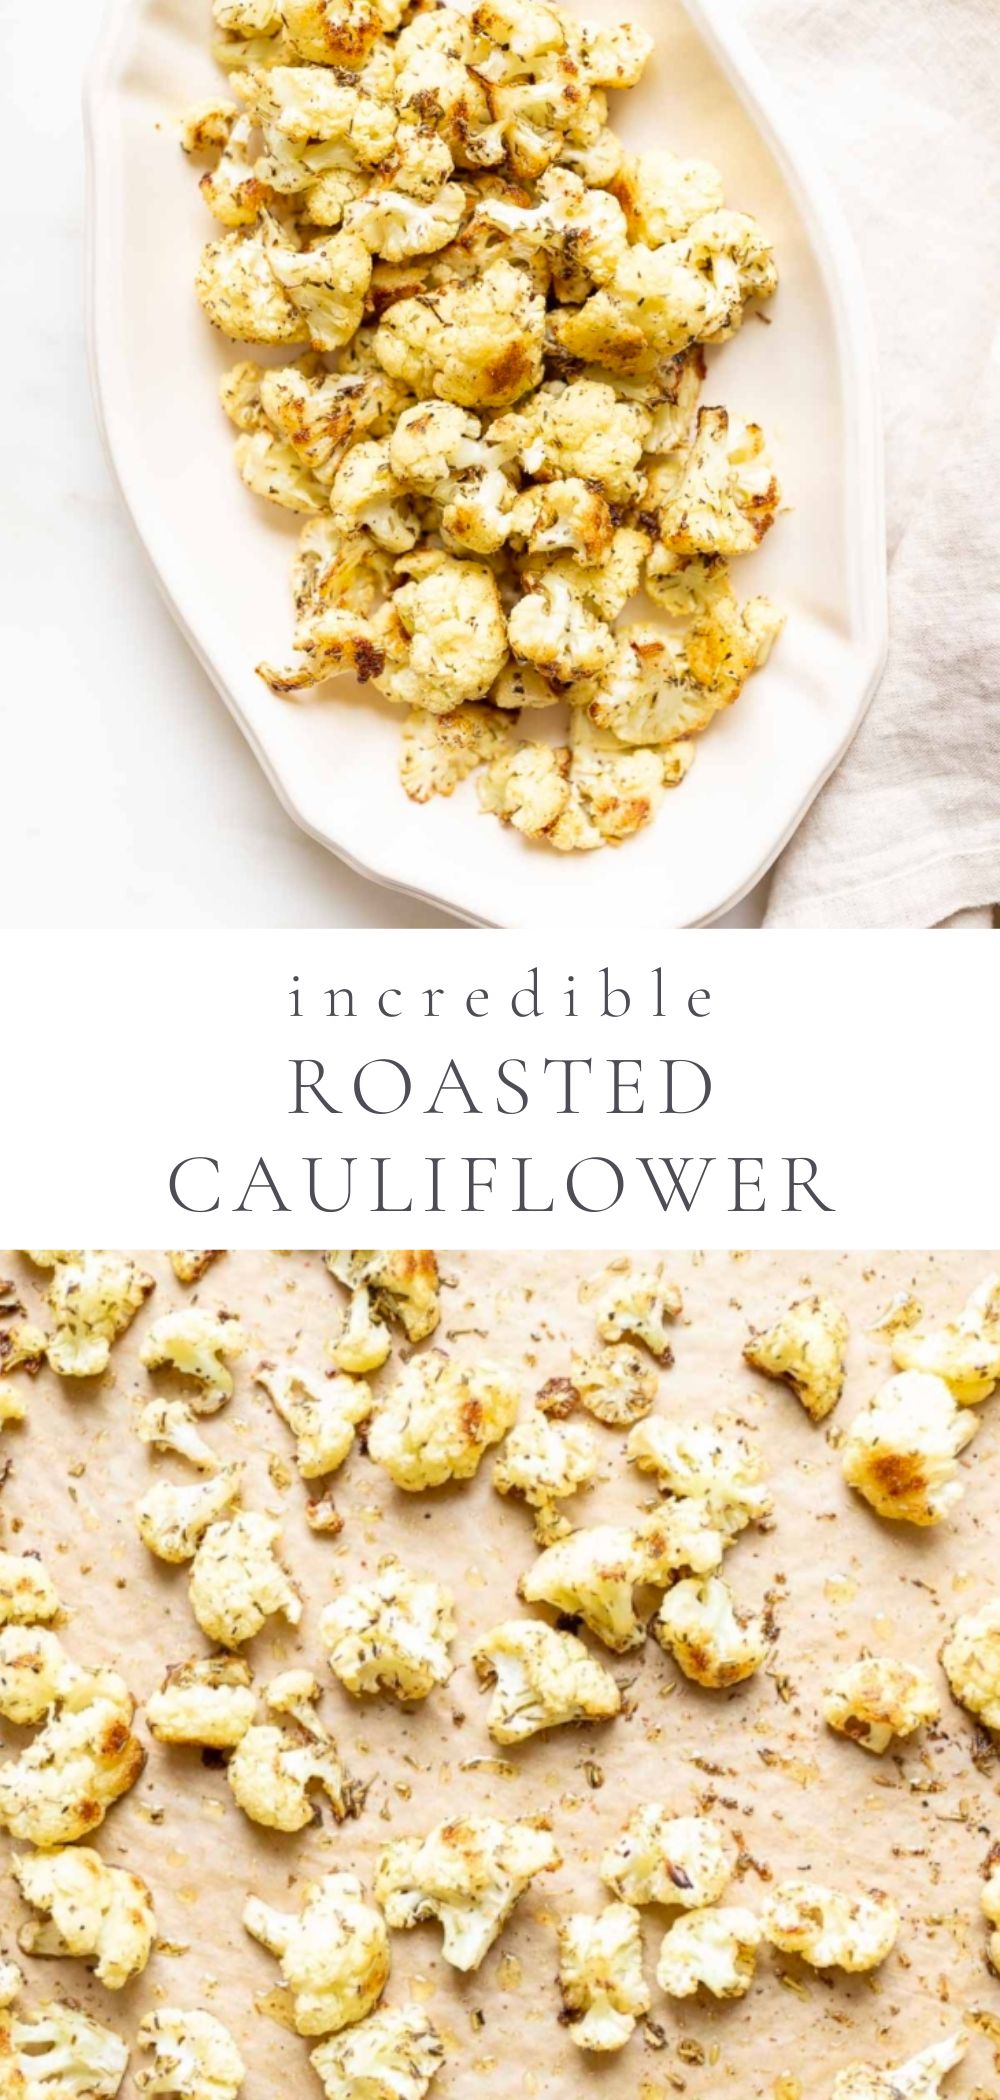 An oval white platter and a coking sheet, filled with roasted cauliflower that is crispy and browned at the edges.